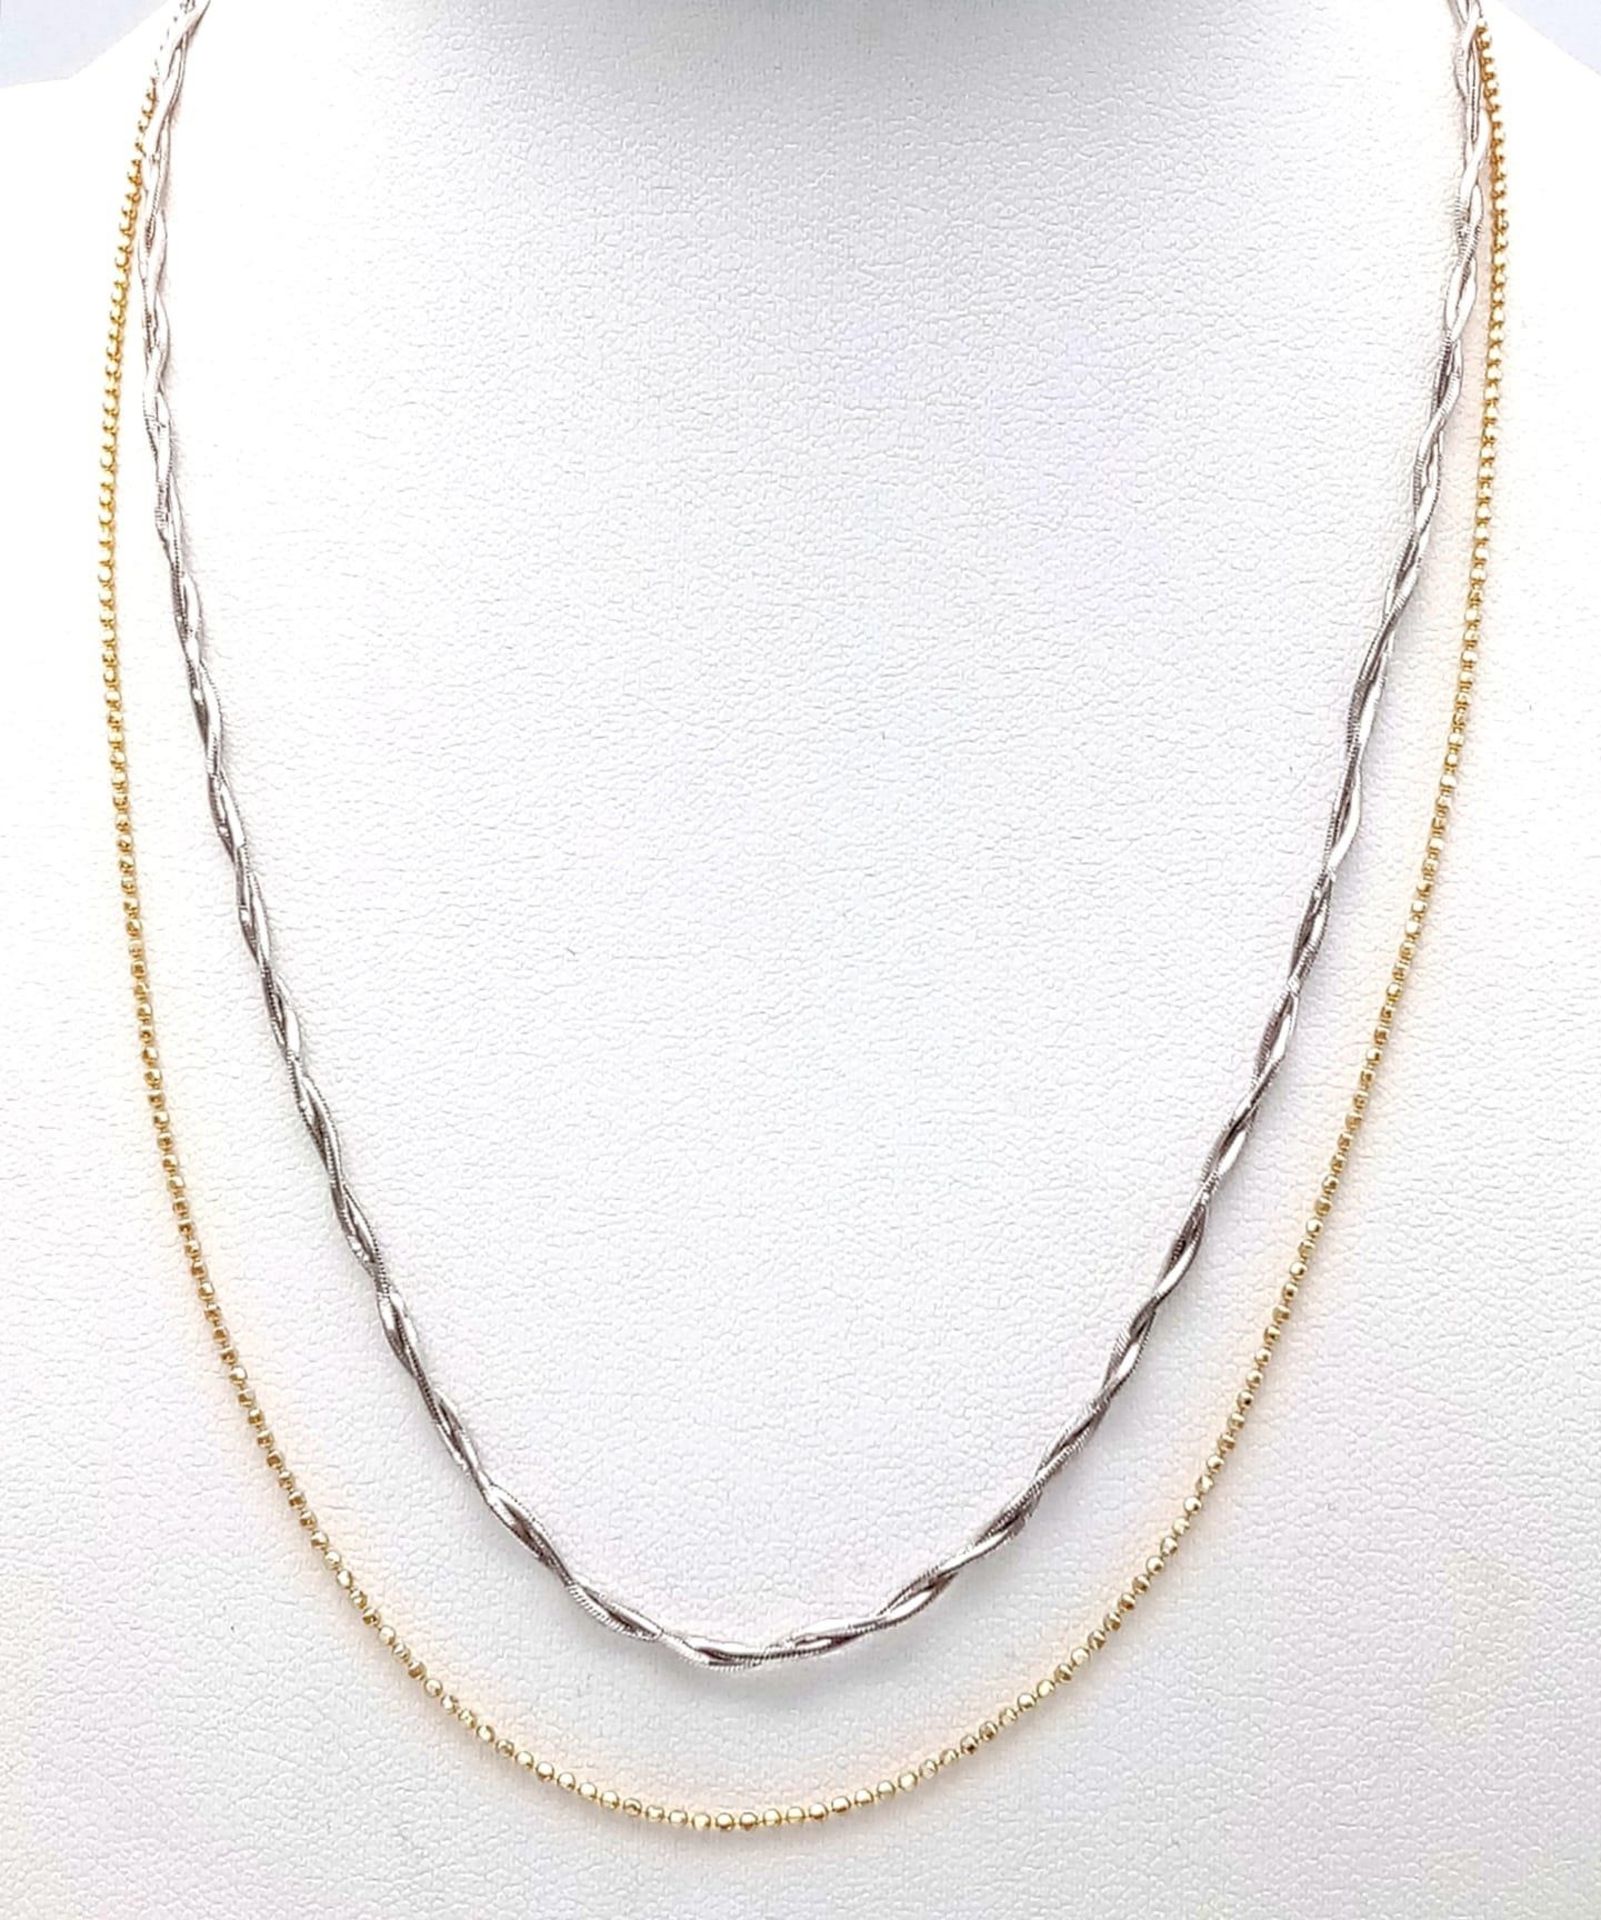 An Interesting 14K Yellow and White Gold Two Row Necklace. Yellow ball-links and a white twist